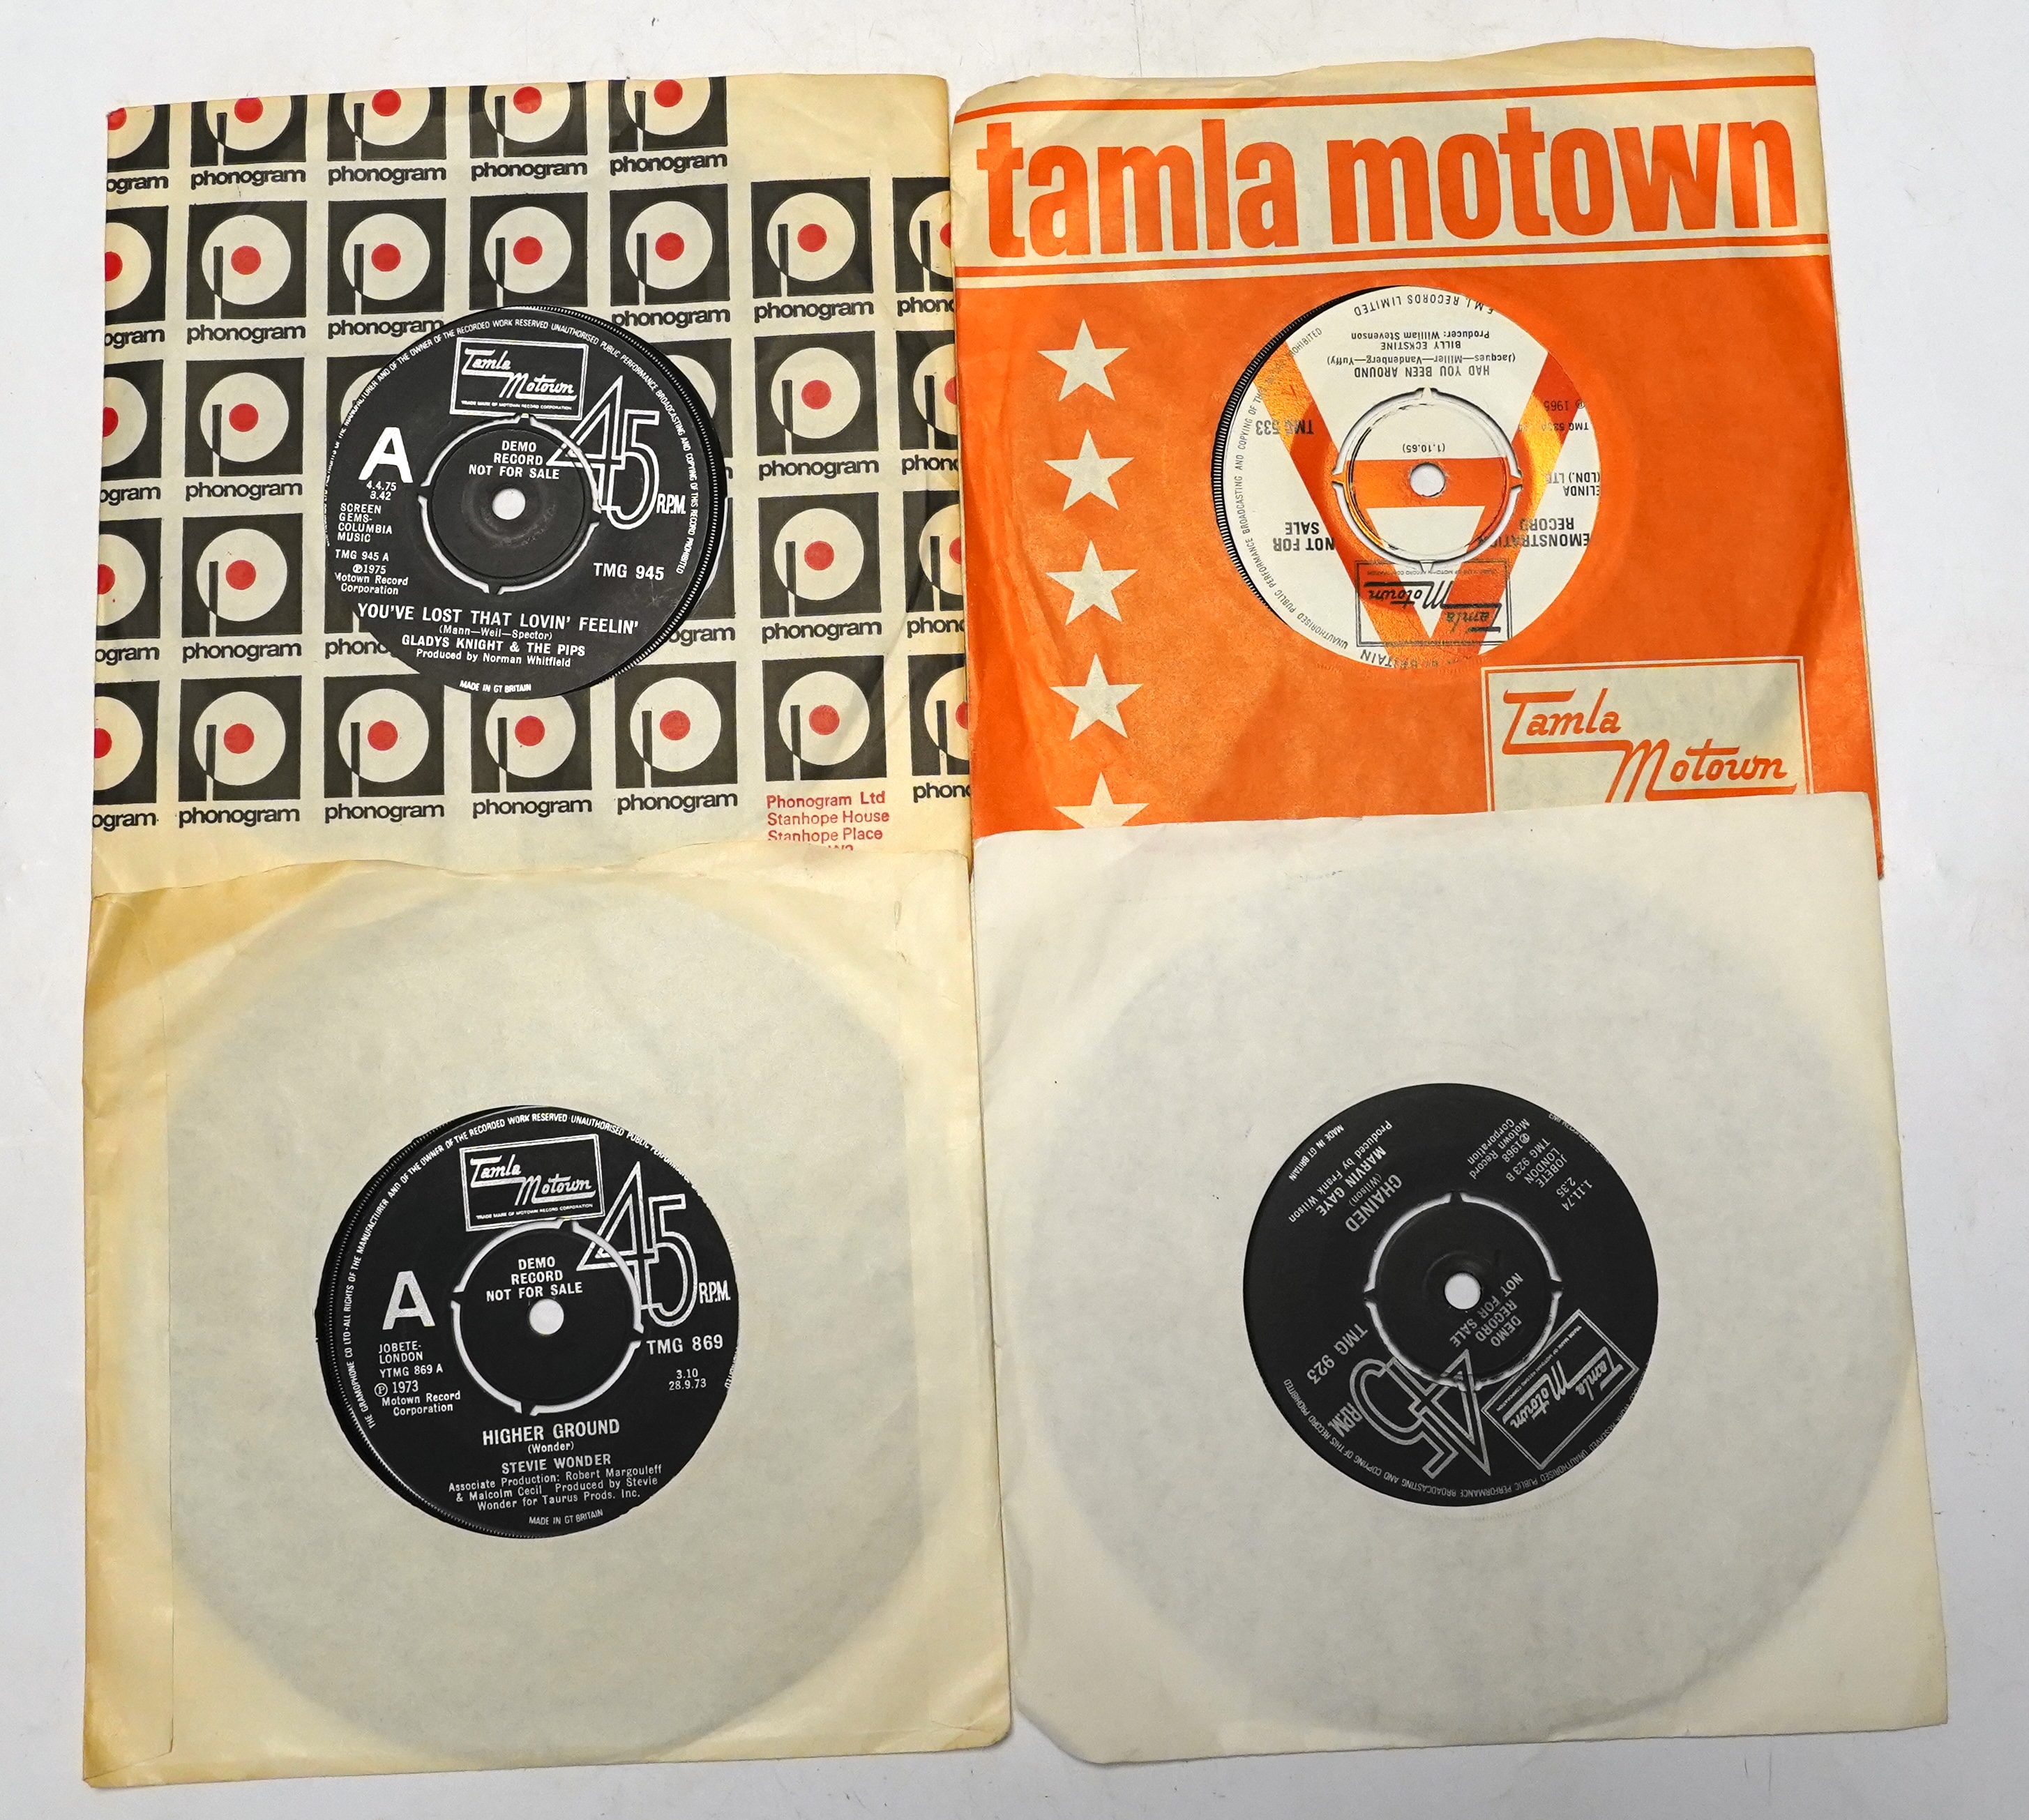 Eight demo 7” singles, all Tamala Motown label with printed demo labels by Marvin Gaye, Billy Eckstine, Gladys Knight and the Pips, and Stevie Wonder, hits including; I Heard It Through the Grapevine, You’ve Lost That Lo